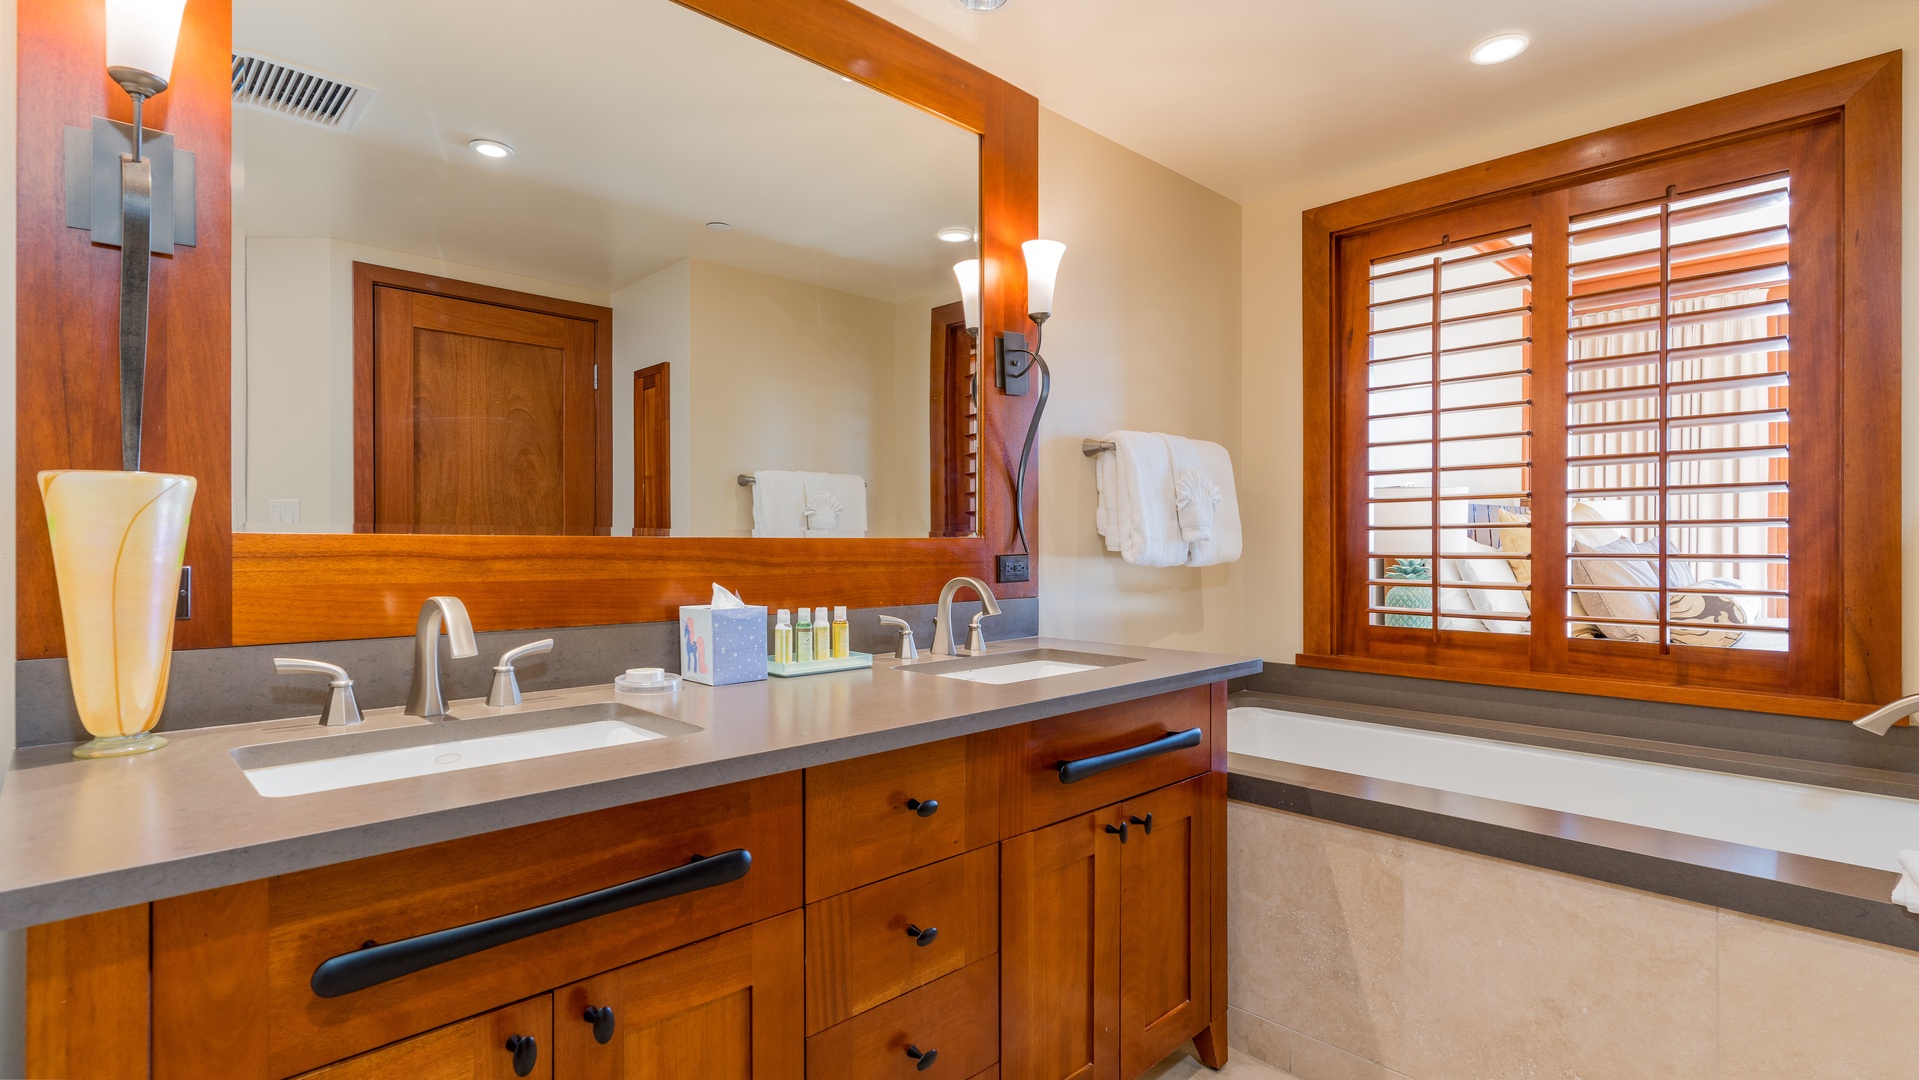 Kapolei Vacation Rentals, Ko Olina Beach Villas B309 - The primary guest bathroom with a soaking tub for luxurious relaxation.